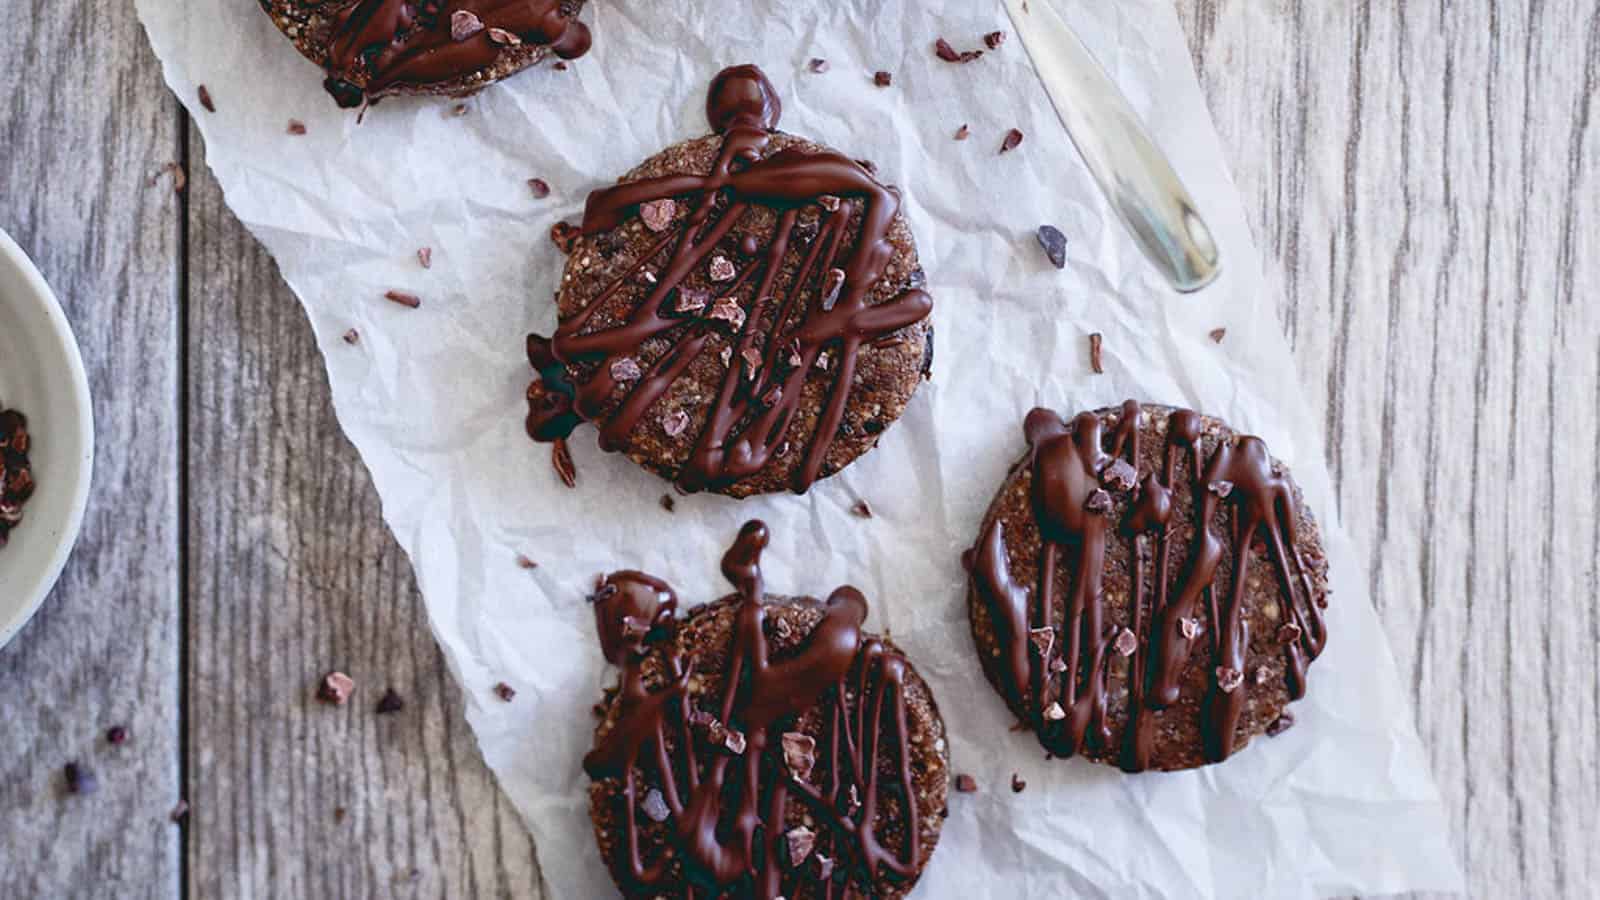 Raw brownie bites on parchment paper drizzled with chocolate.